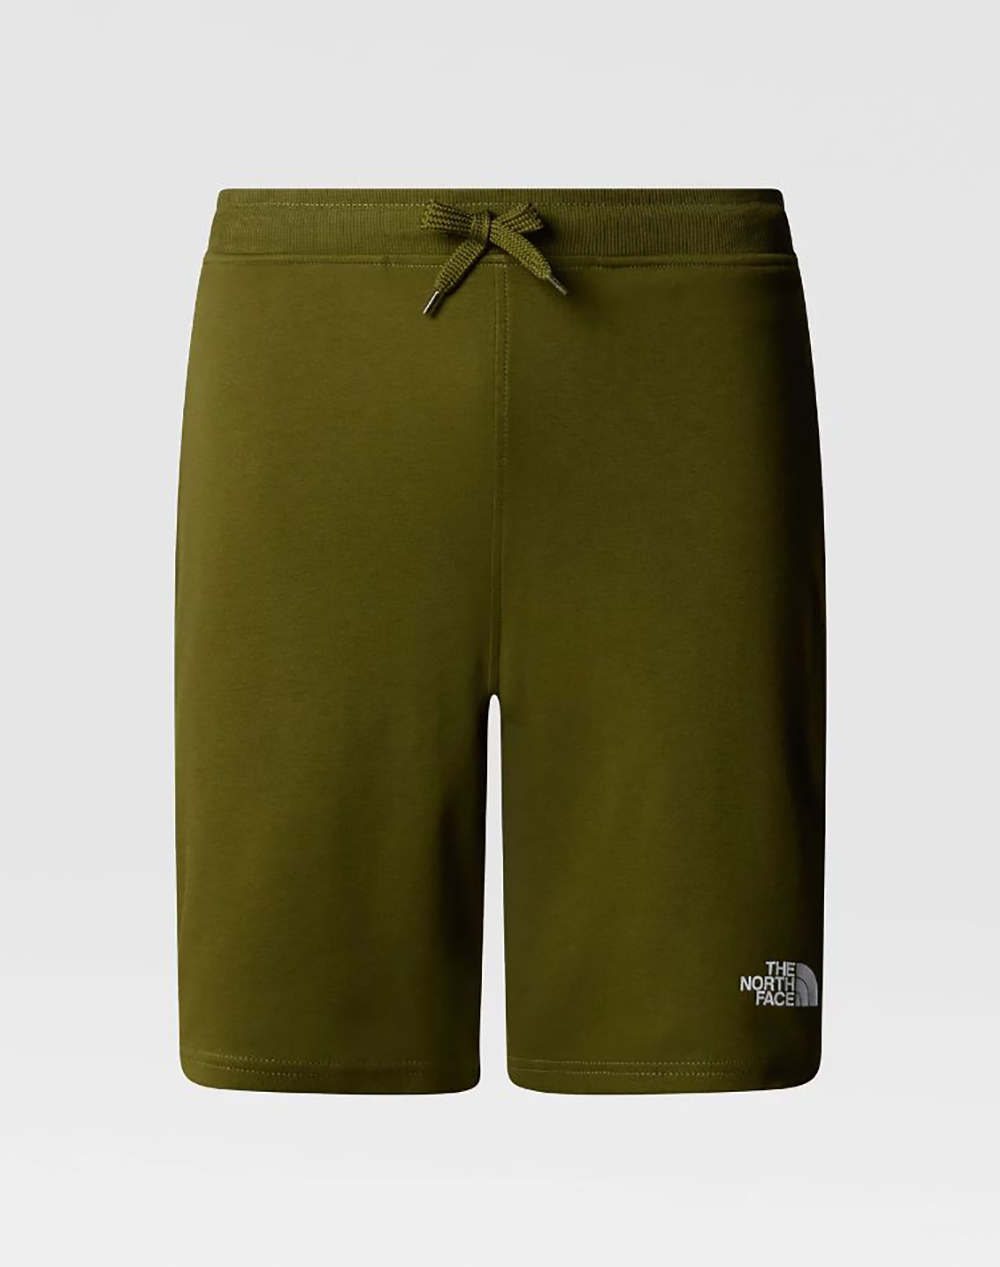 THE NORTH FACE M GRAPHIC SHORT LIGT NF0A3S4F-NFPIB Olive